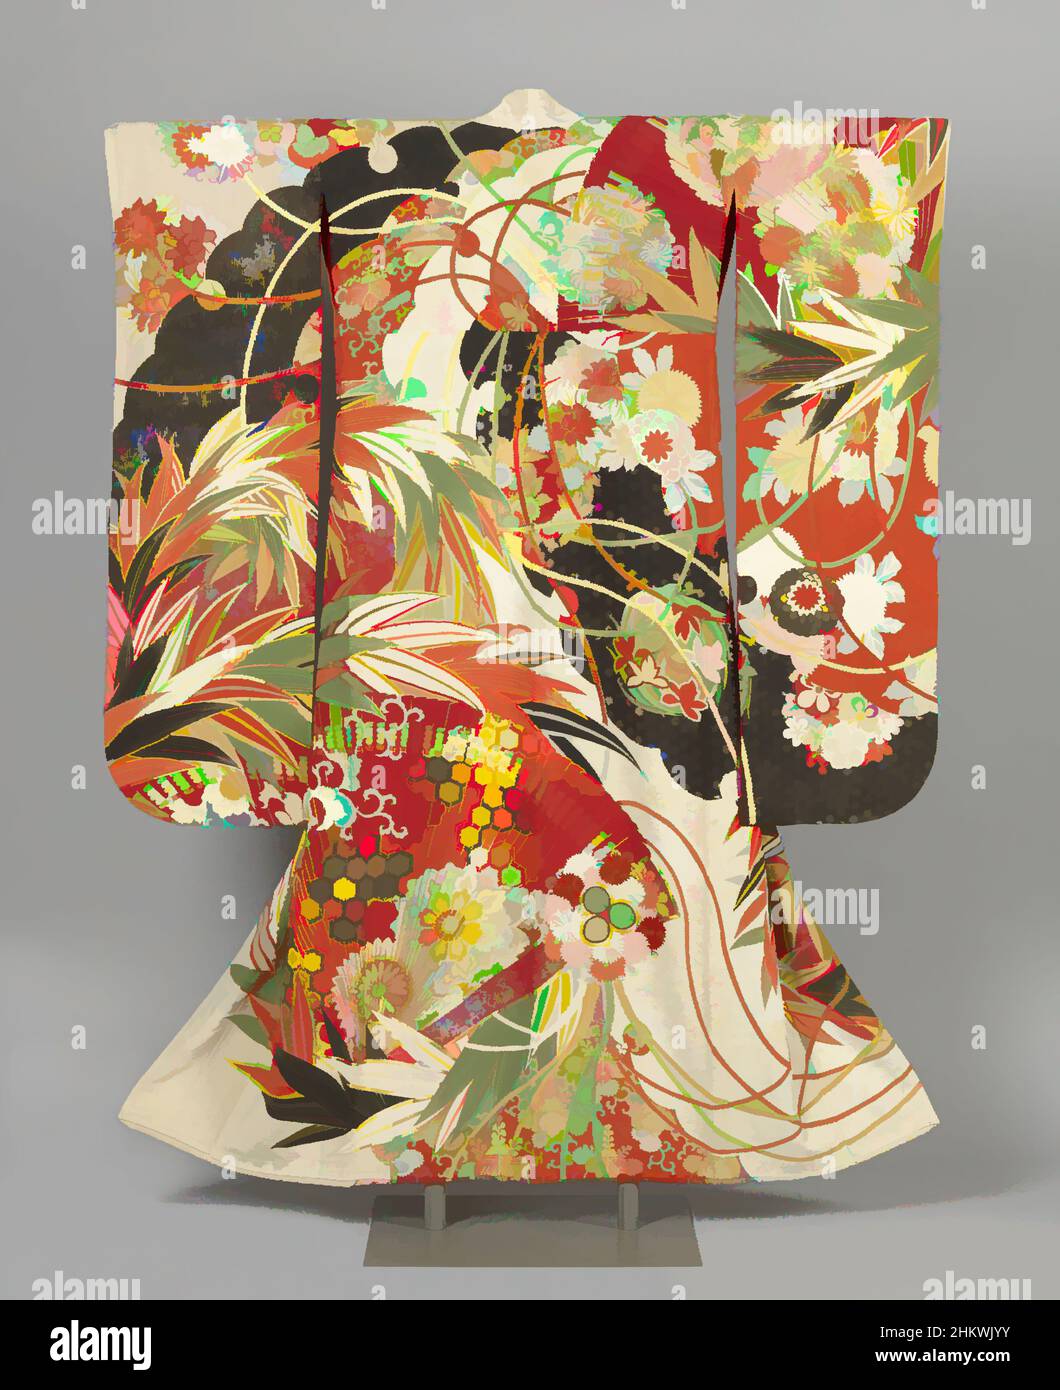 Art inspired by Kimono for an unmarried woman, Formal long-sleeved kimono for an unmarried young woman (furisode), decorated all over with large fans, snowflake, bamboo, chrysanthemum and other plant motifs, with bulbs on cords traversing the composition. Creamy white crepe silk with, Classic works modernized by Artotop with a splash of modernity. Shapes, color and value, eye-catching visual impact on art. Emotions through freedom of artworks in a contemporary way. A timeless message pursuing a wildly creative new direction. Artists turning to the digital medium and creating the Artotop NFT Stock Photo